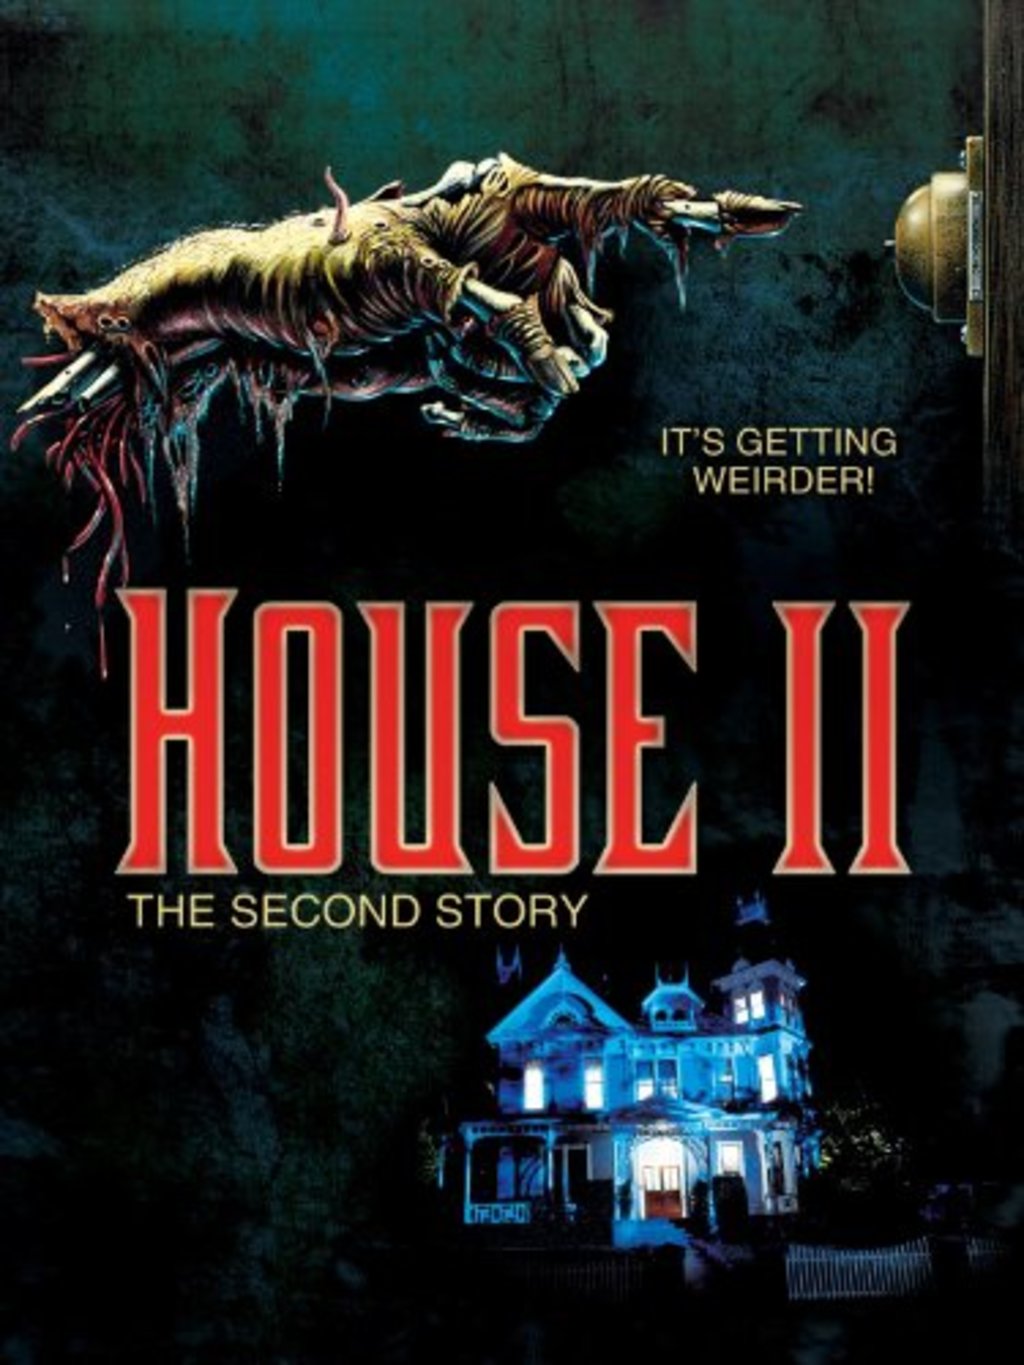 House II The Second Story (1986)